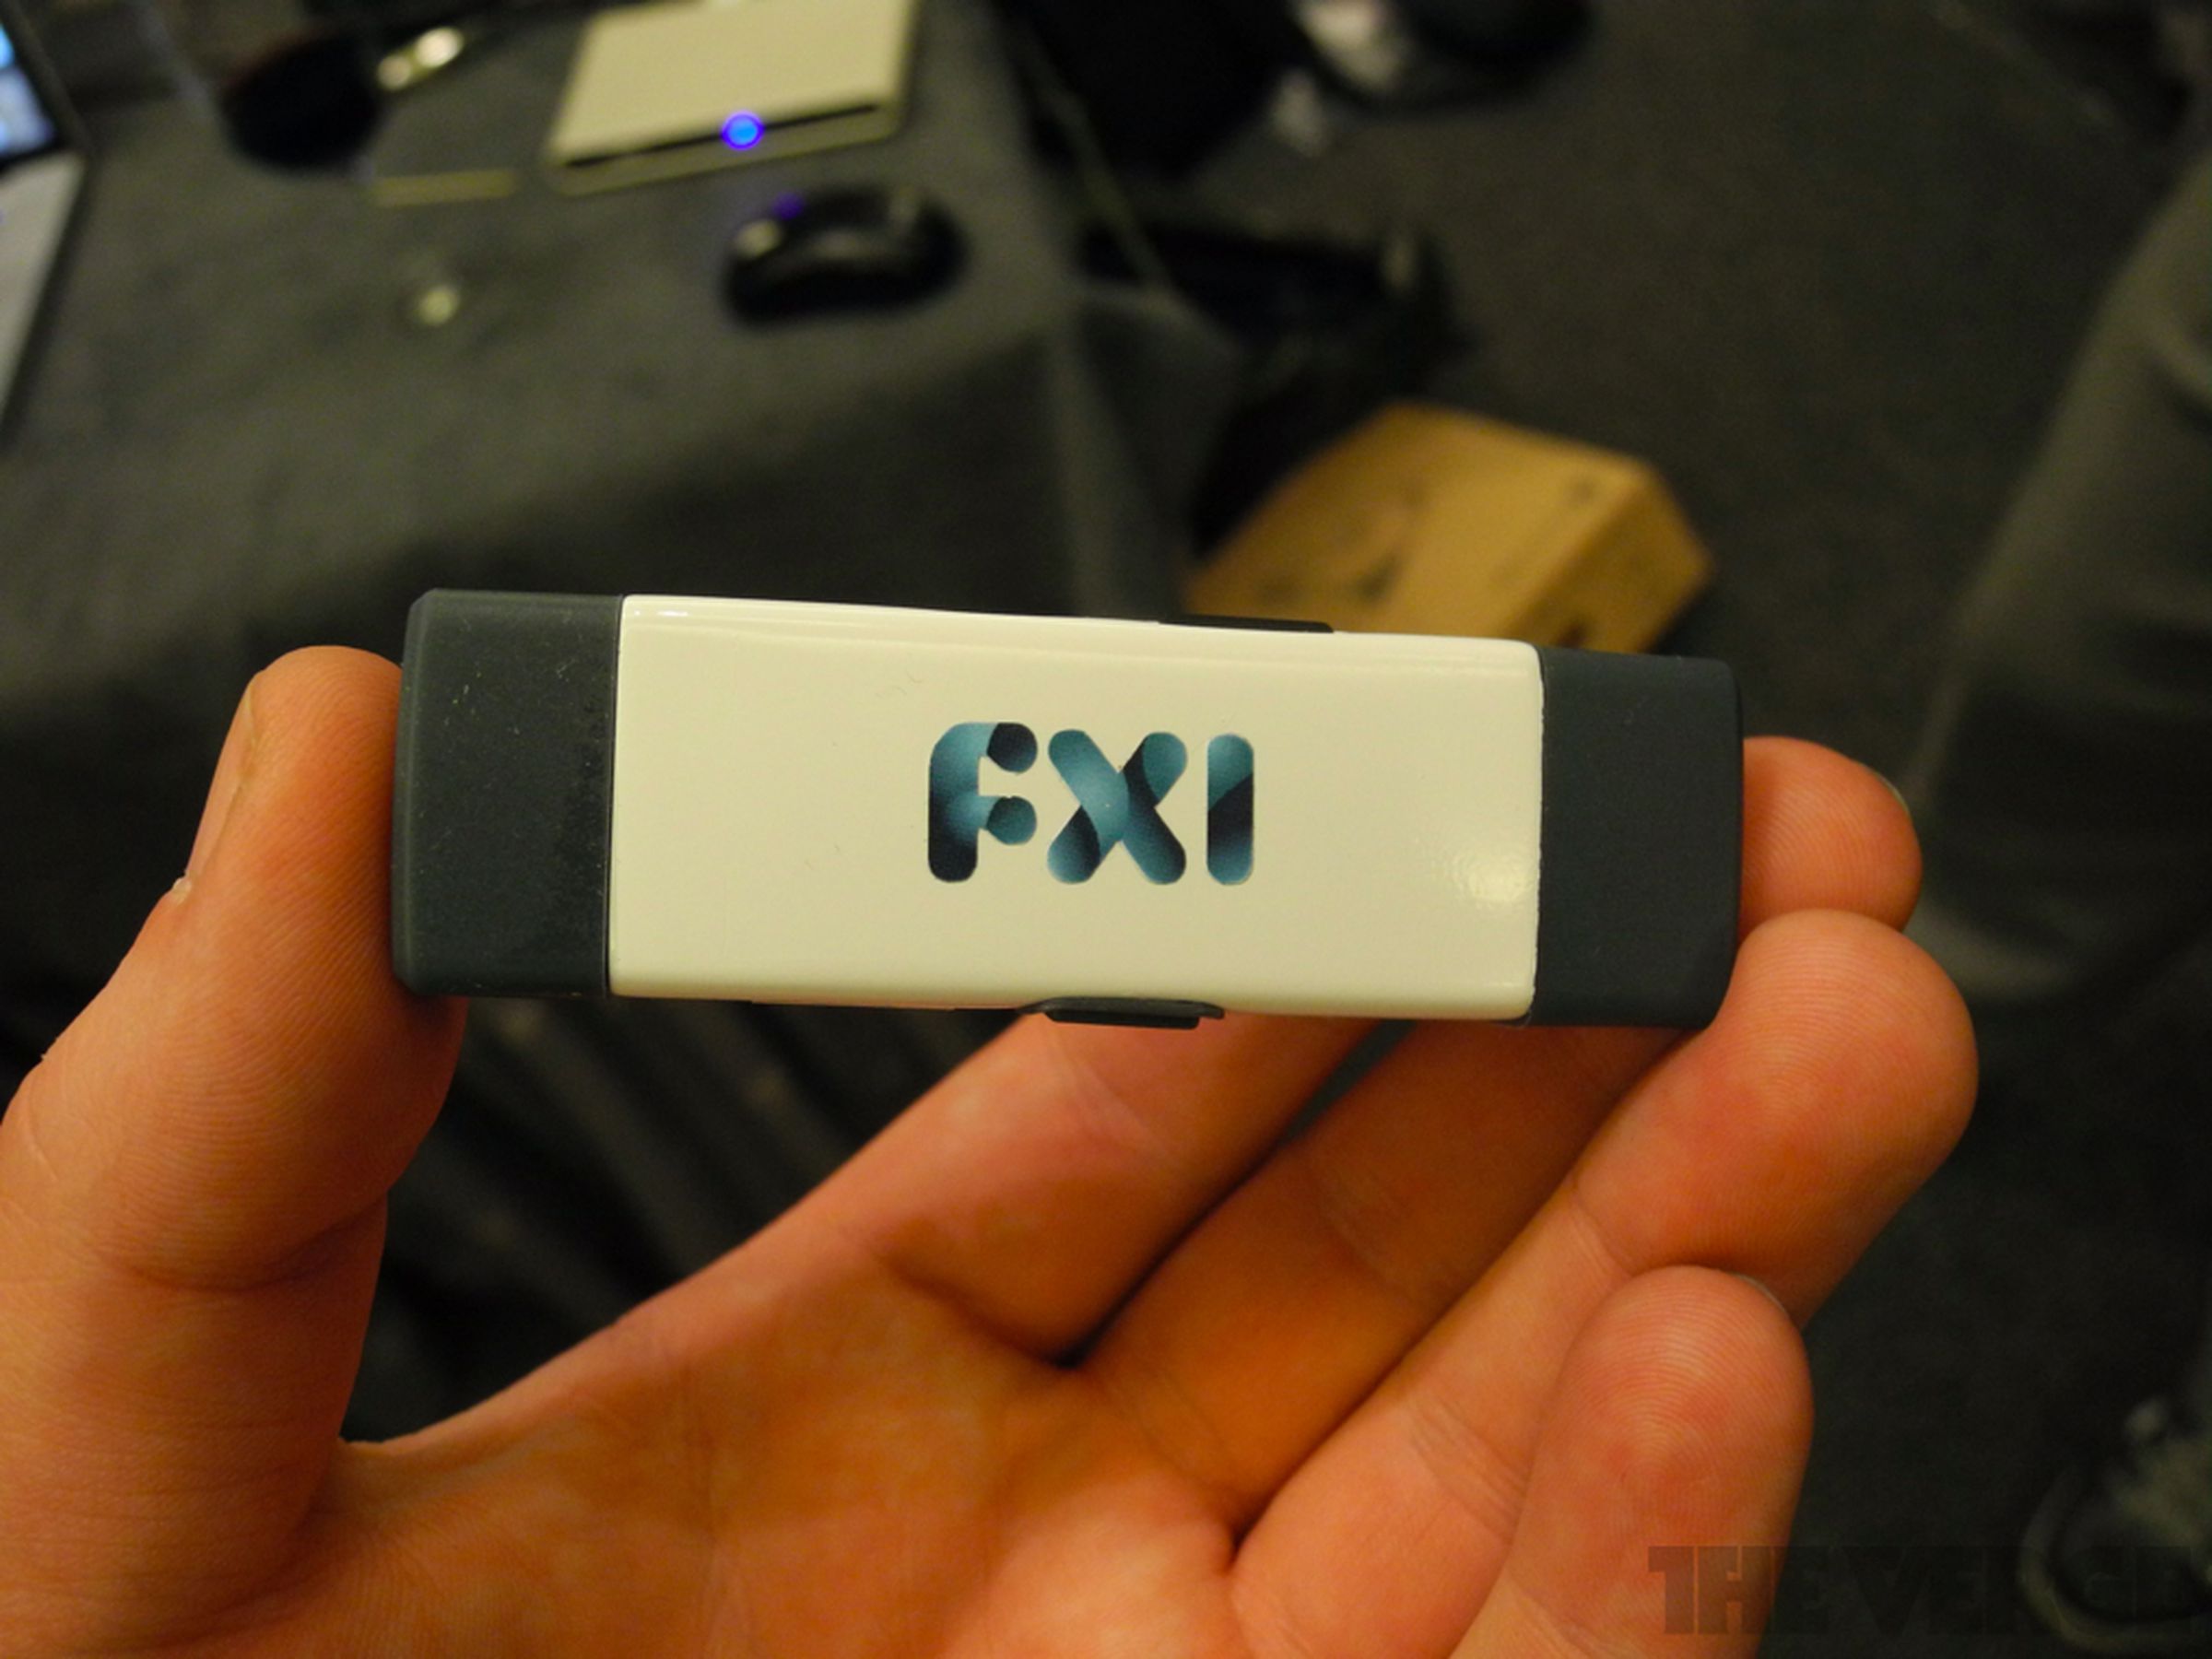 FXI Cotton Candy redesign hands-on photos